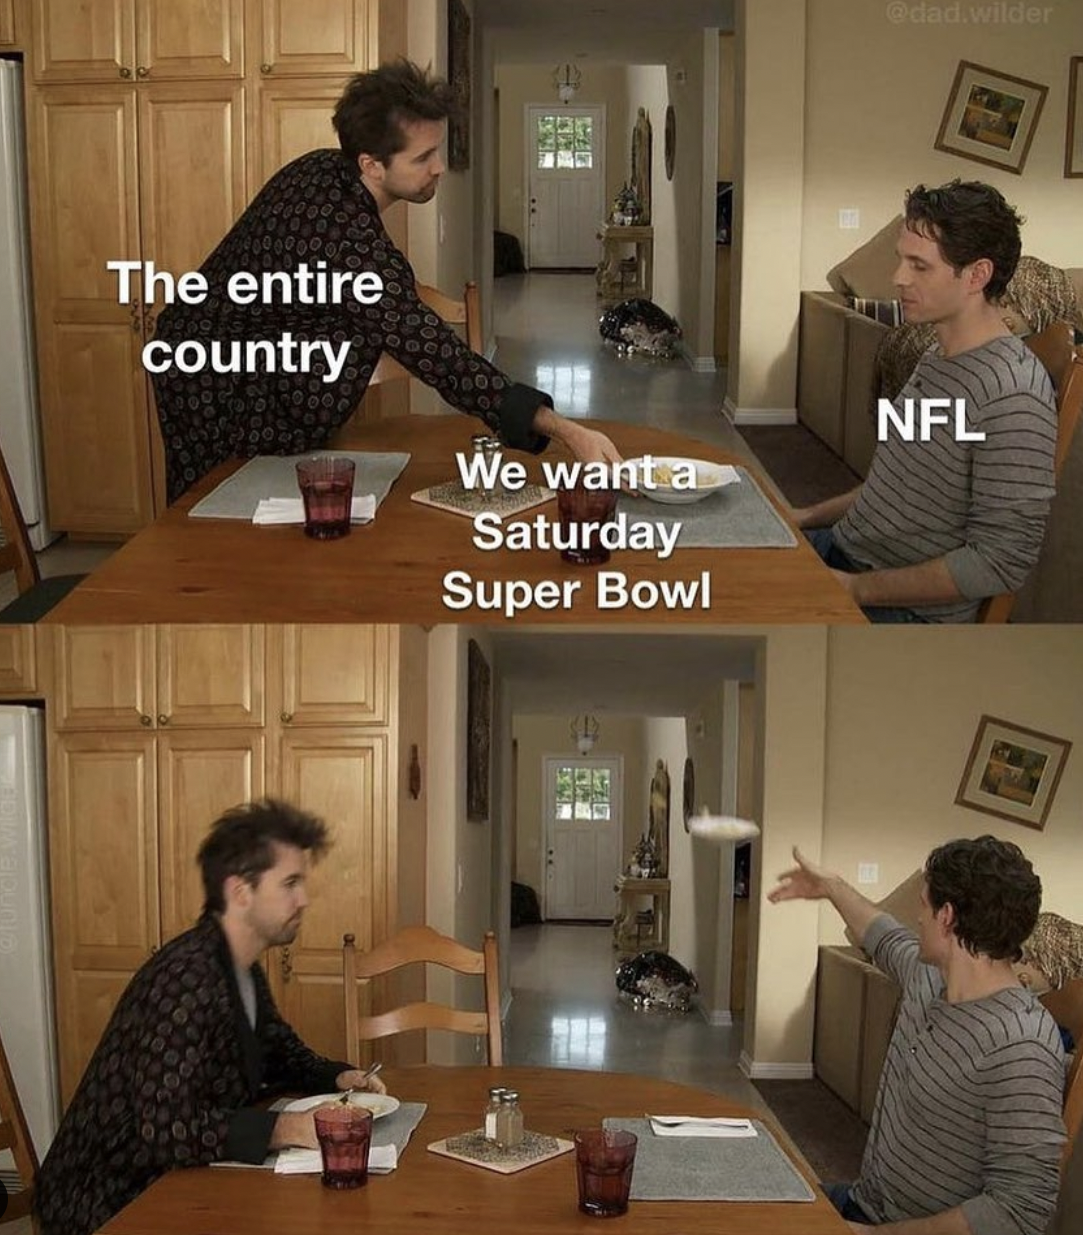 super bowl memes 2022 - always sunny mac and cheese - The entire country Nfl We want a Saturday Super Bowl Be